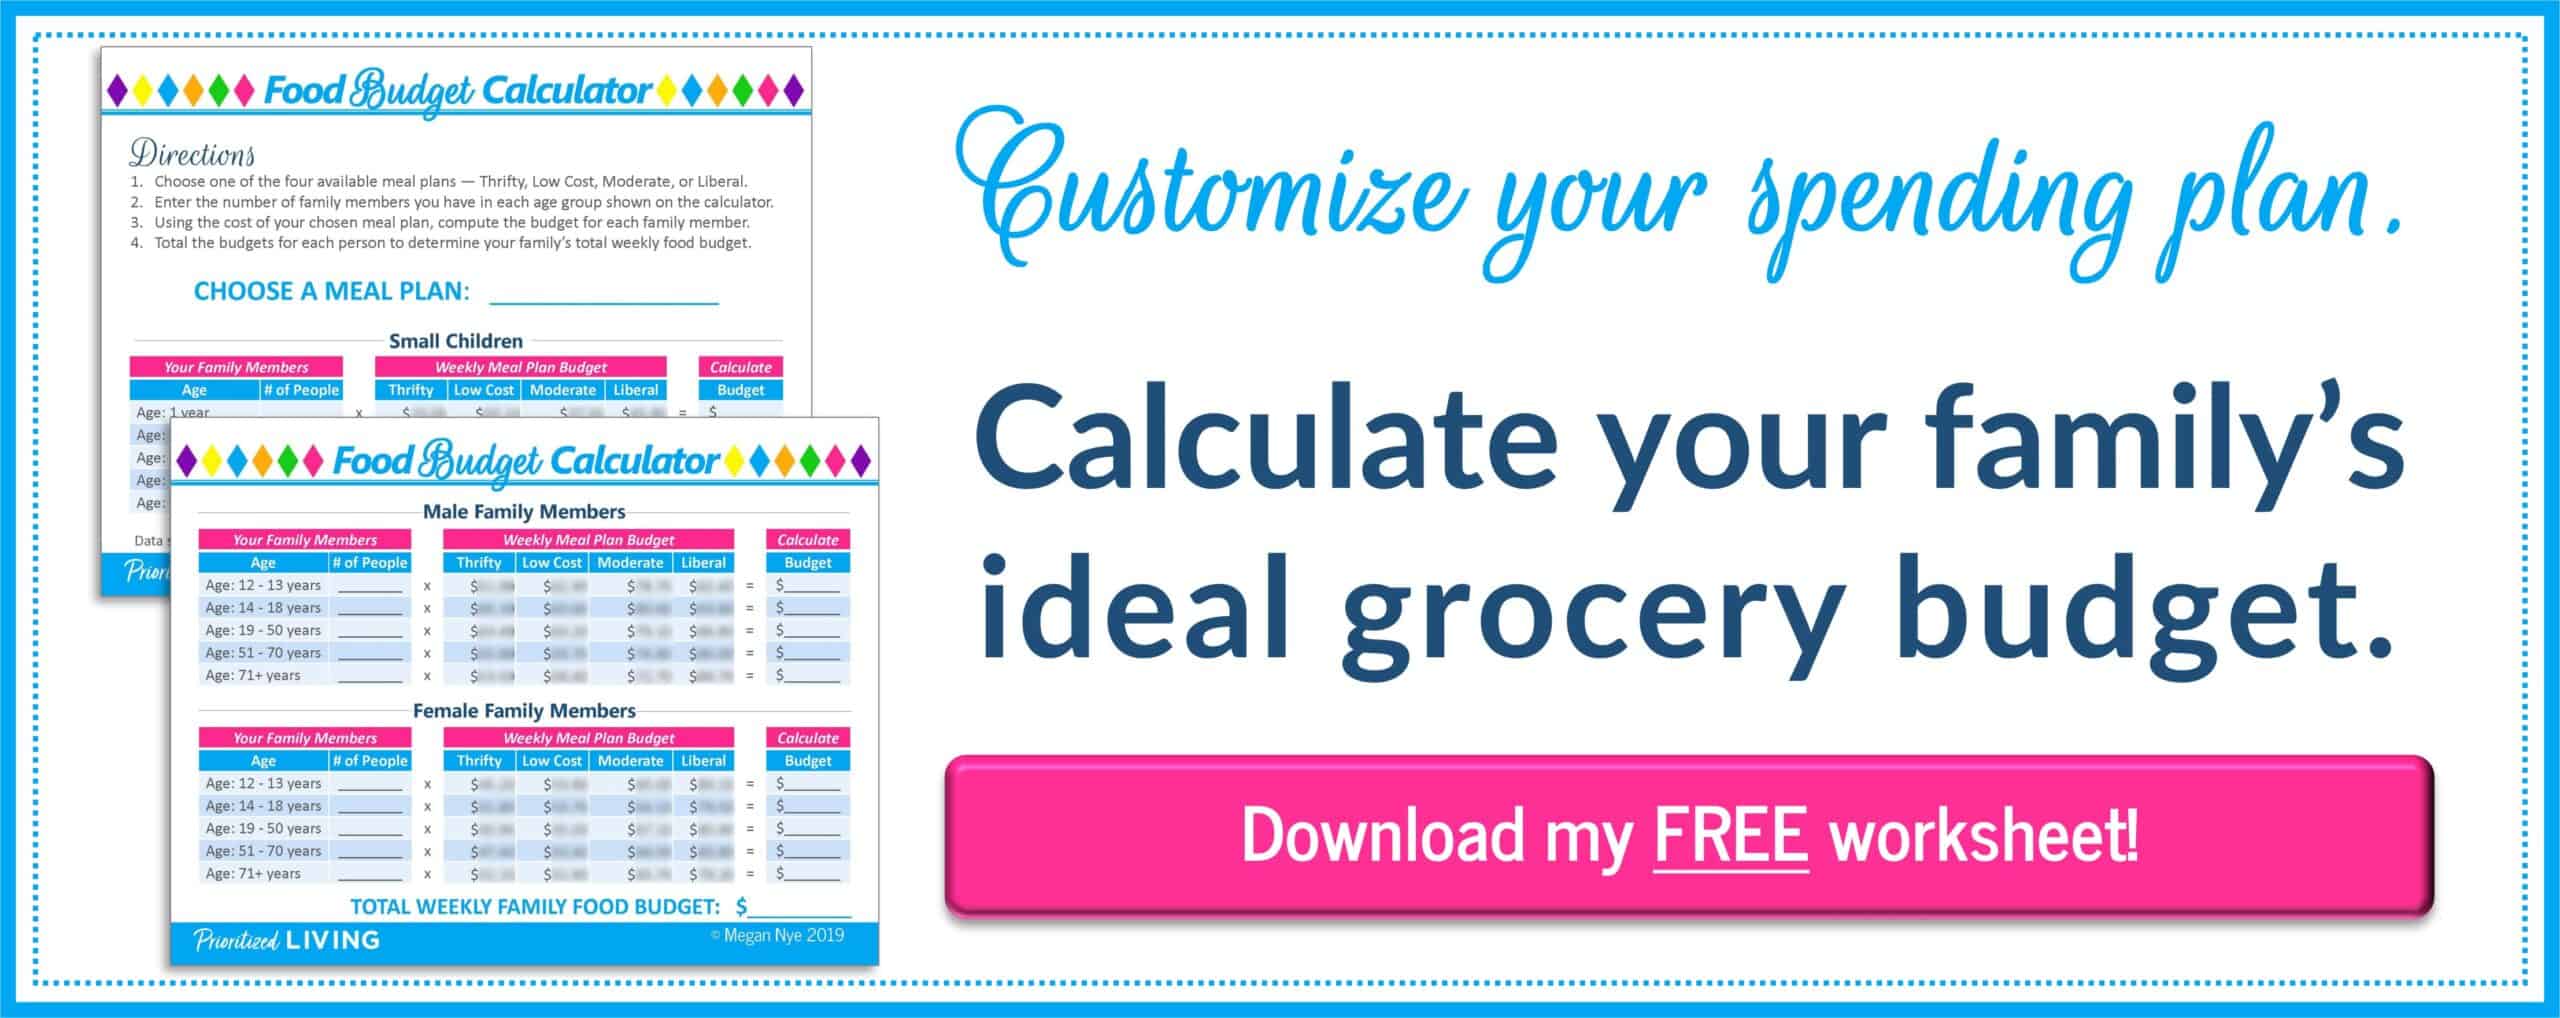 FREE Food Budget Calculator - CLICK HERE!